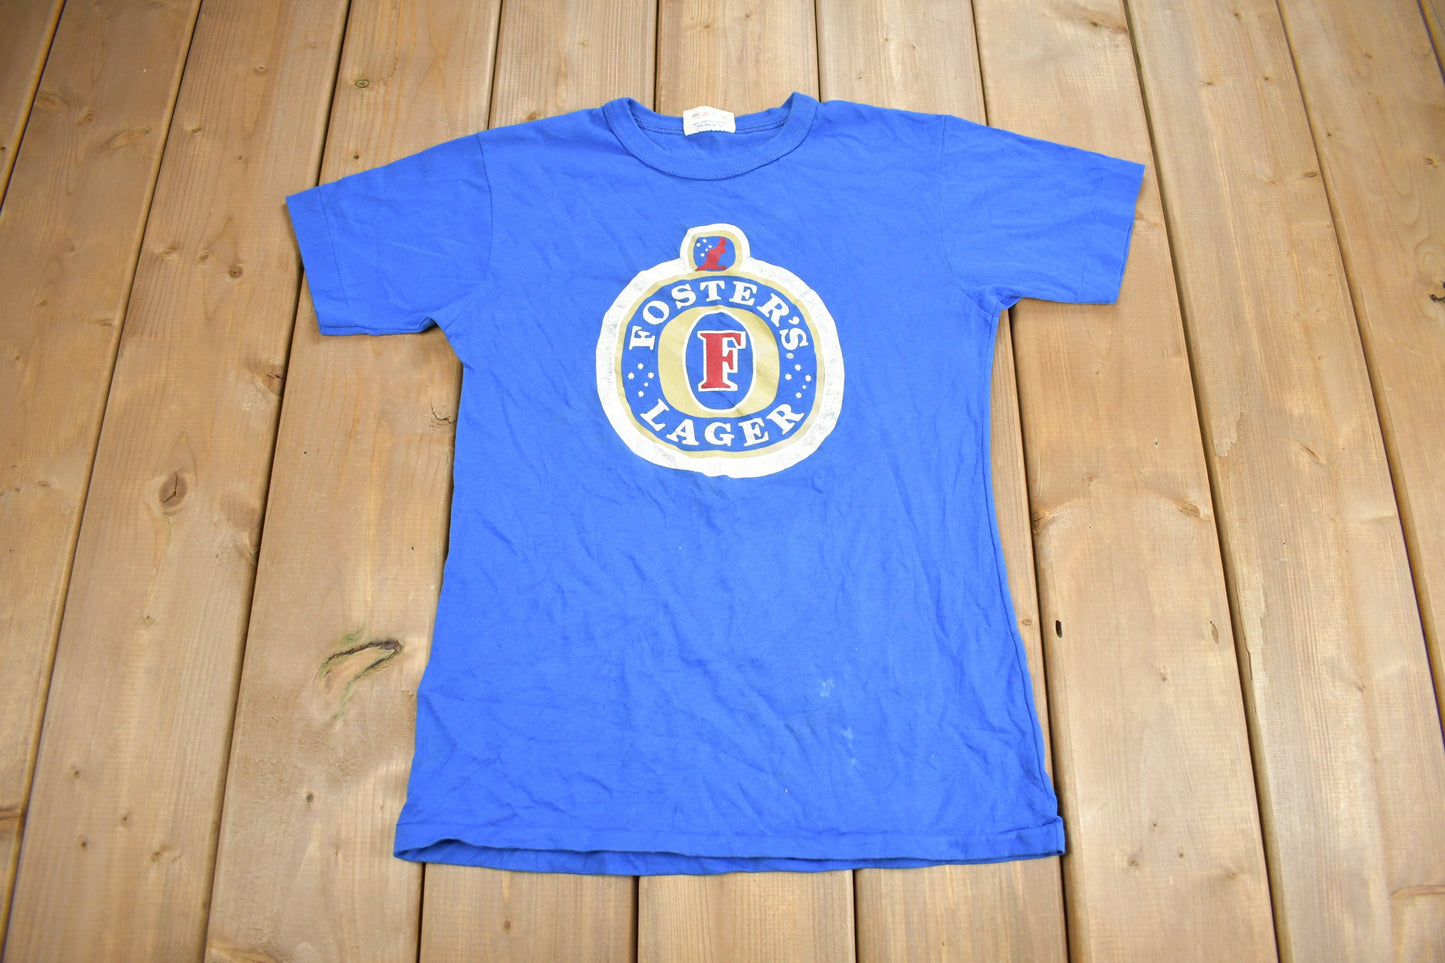 Vintage 1980s Fosters Lager Graphic T Shirt / Vintage T Shirt / Streetwear / Graphic Tee / Single Stitch / Made In Canada